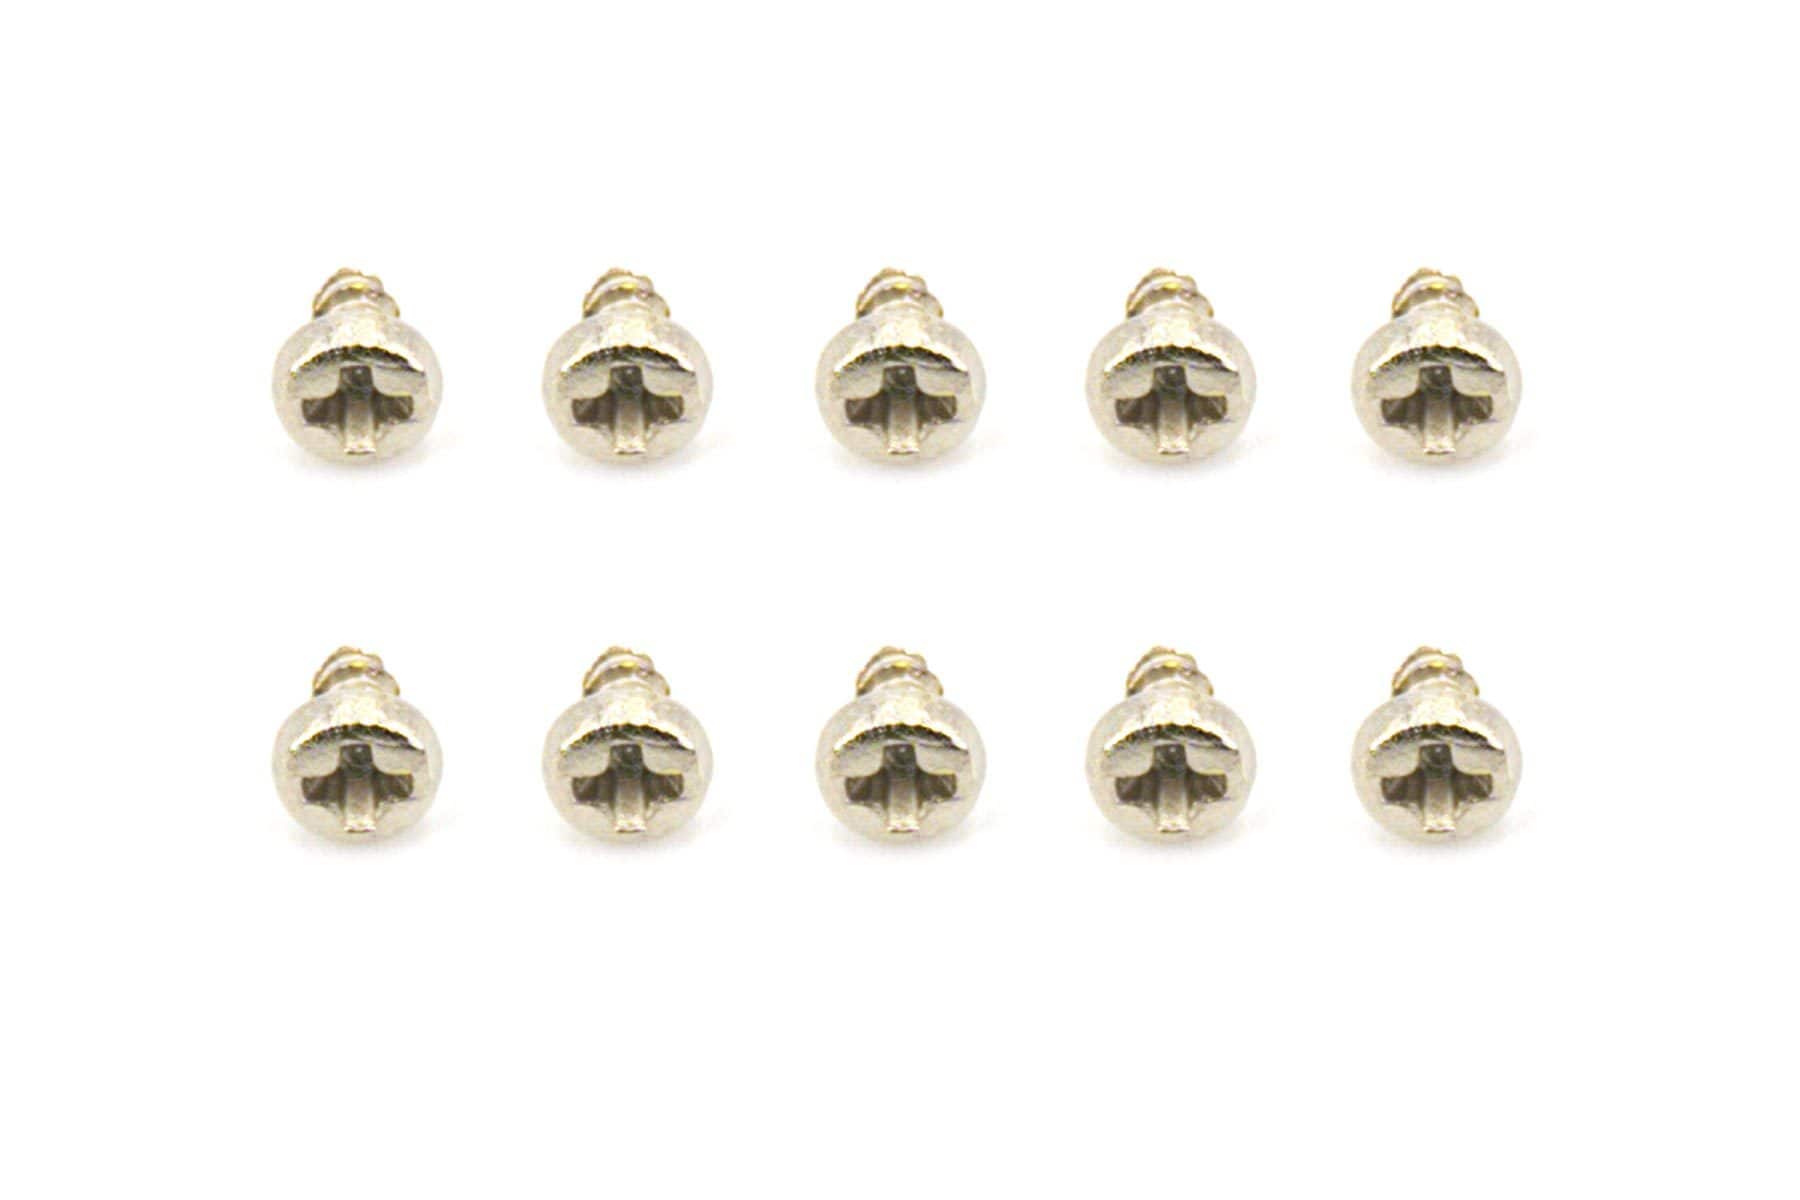 BenchCraft 2mm x 4mm Self-Tapping Screws (10 Pack)